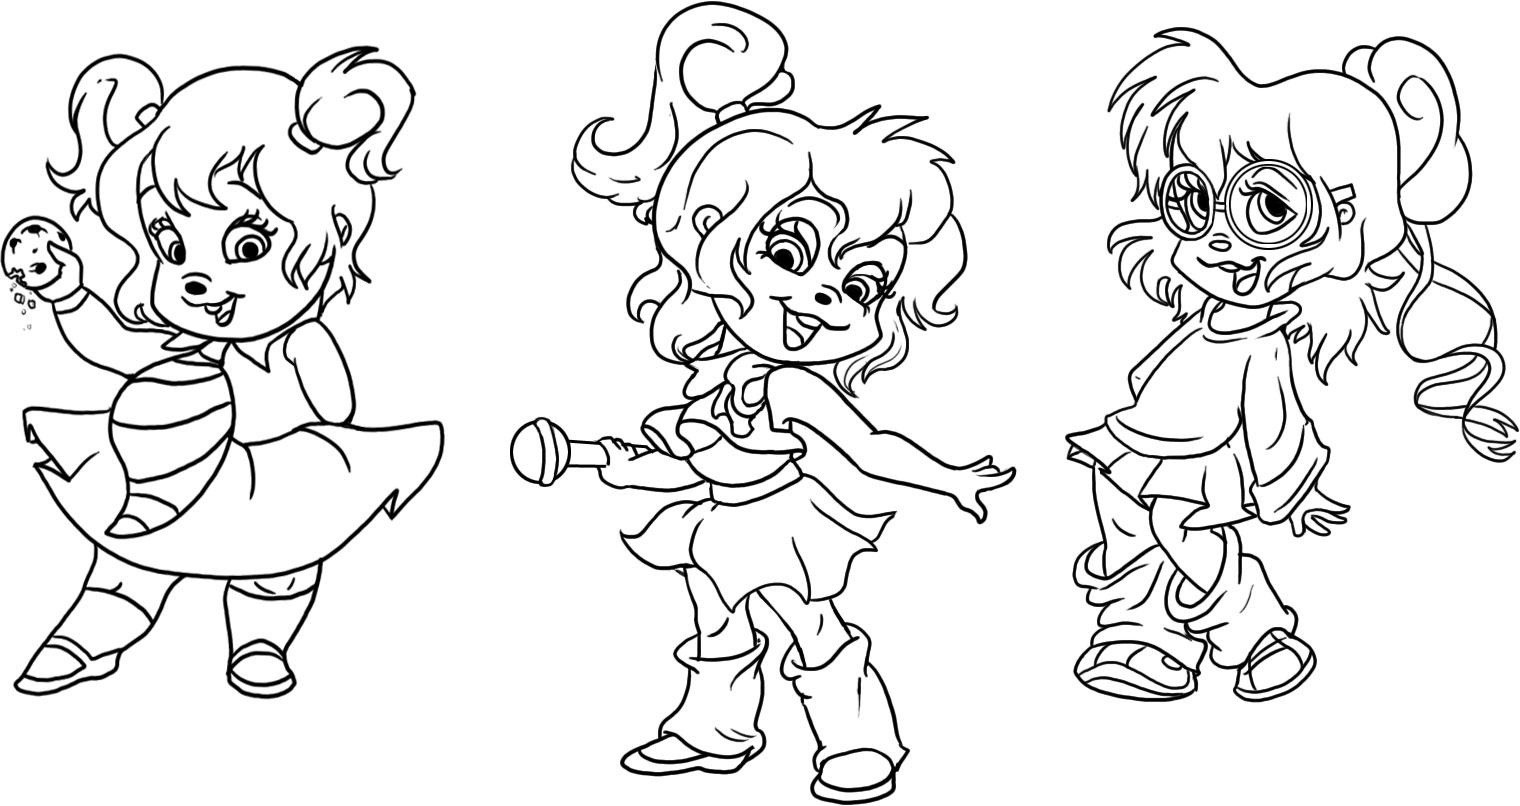 Prinatable Coloring Pages
 Free Printable Chipettes Coloring Pages For Kids